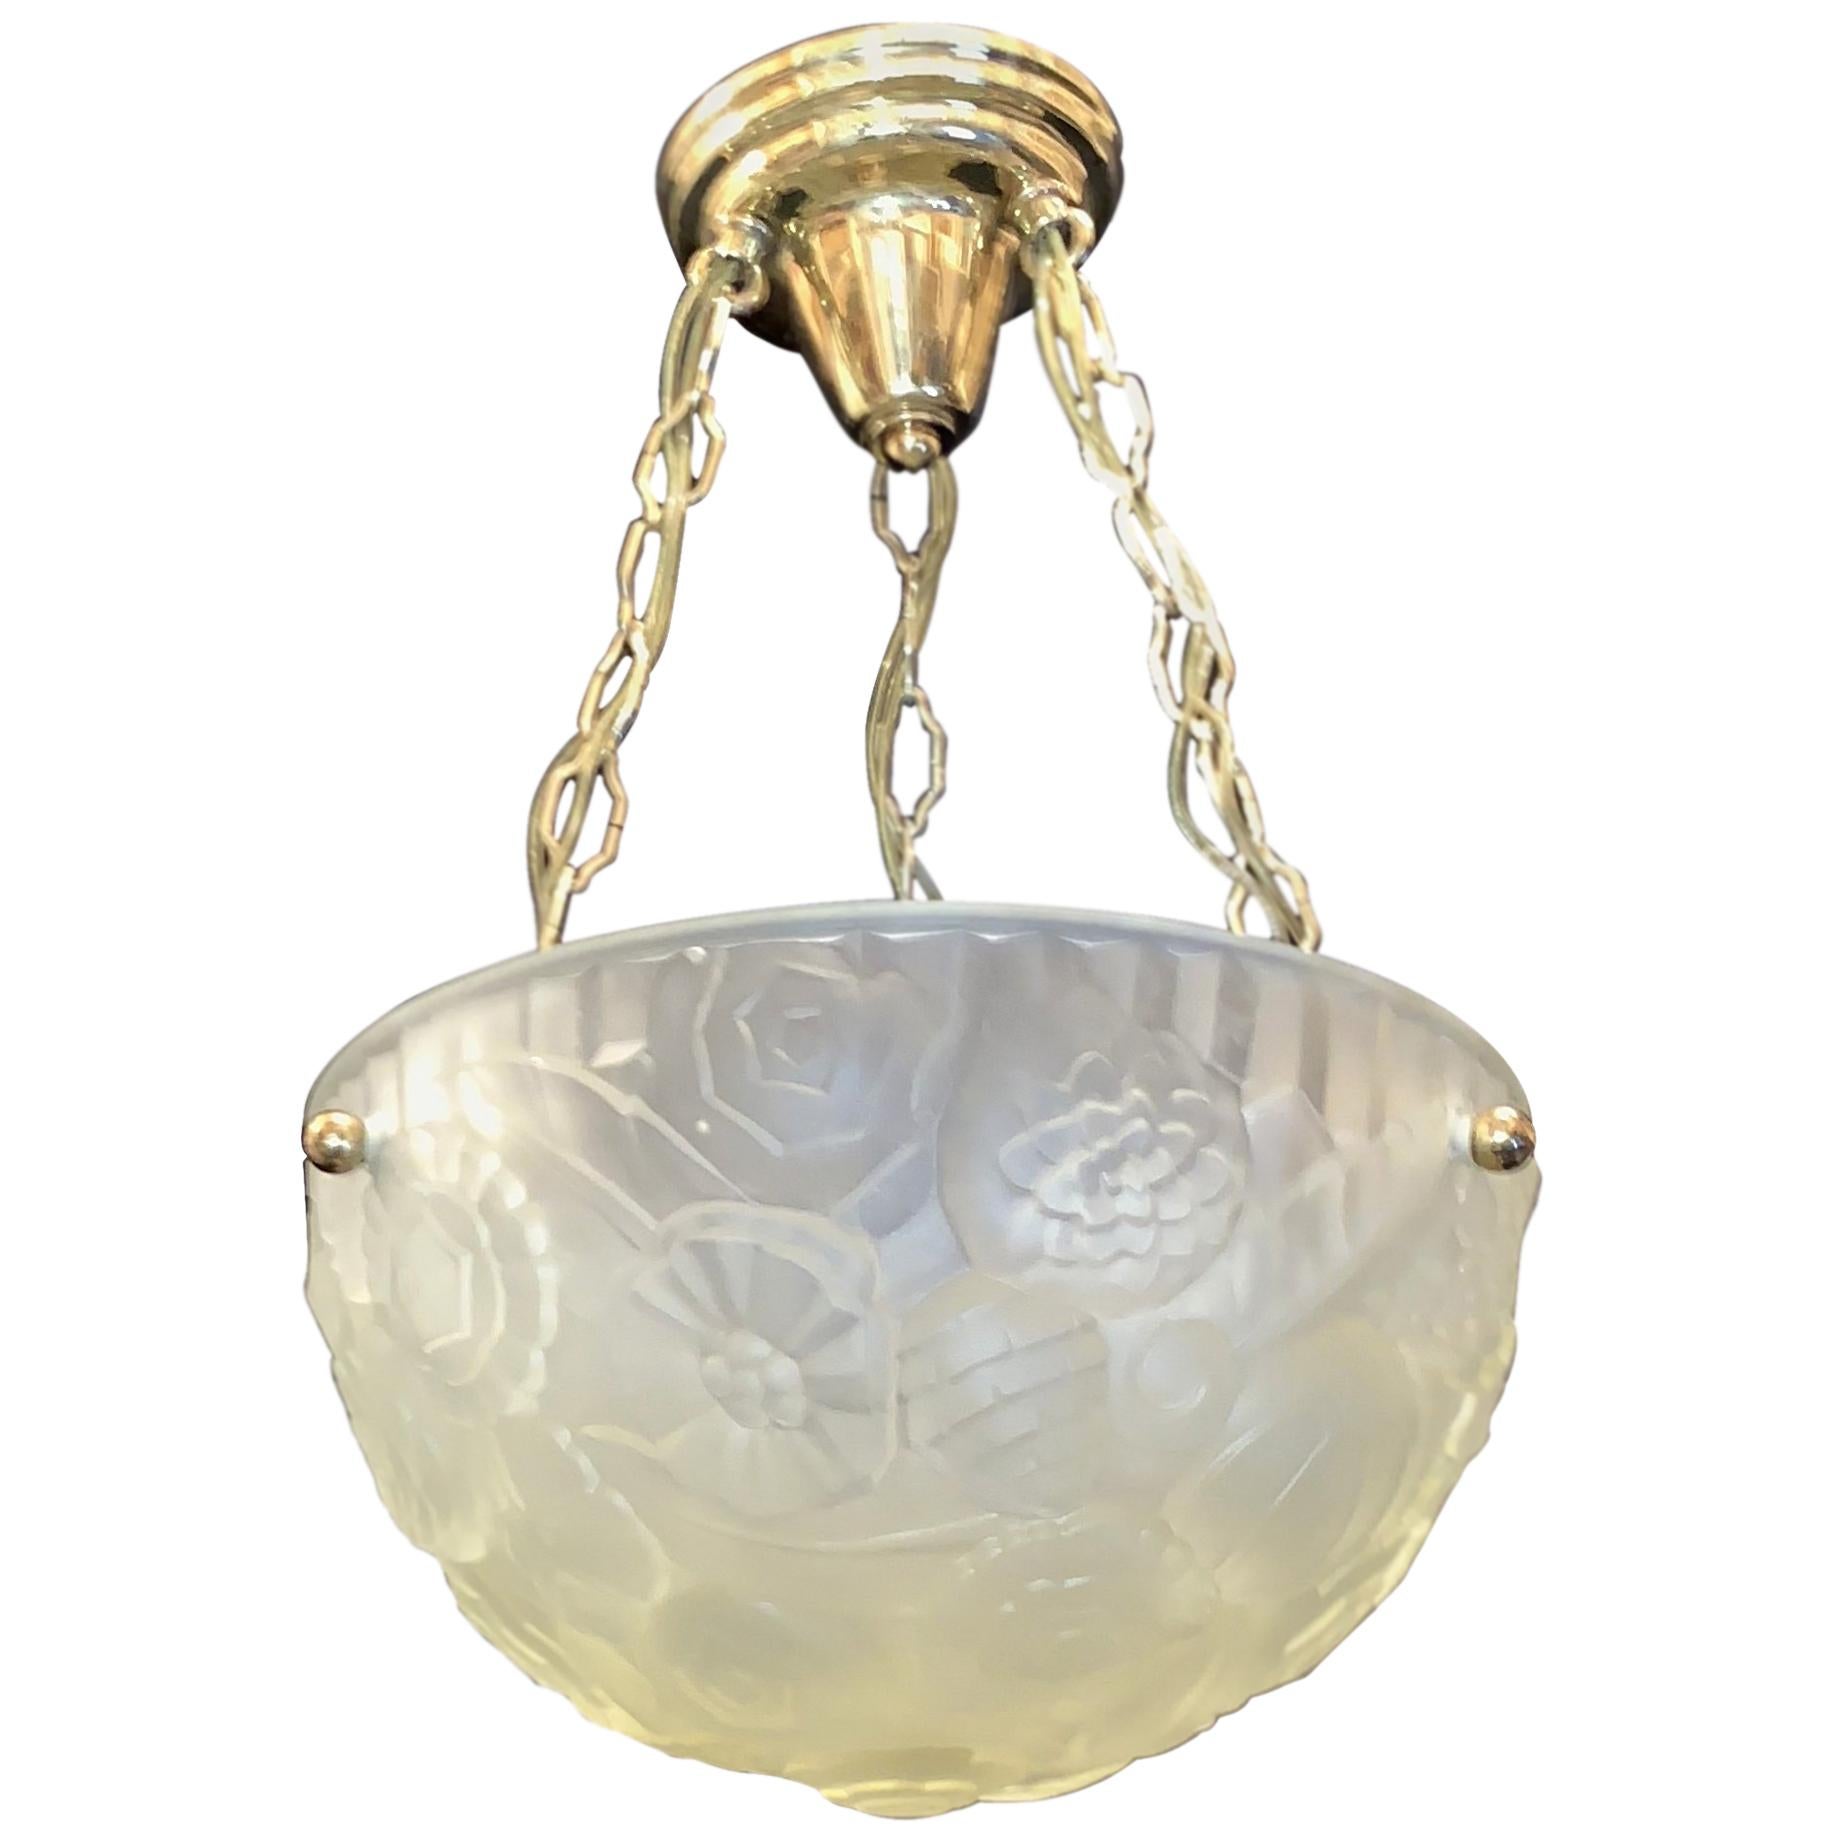 Wonderful French Art Deco Frosted Floral Design Glass Brass Degué Chandelier